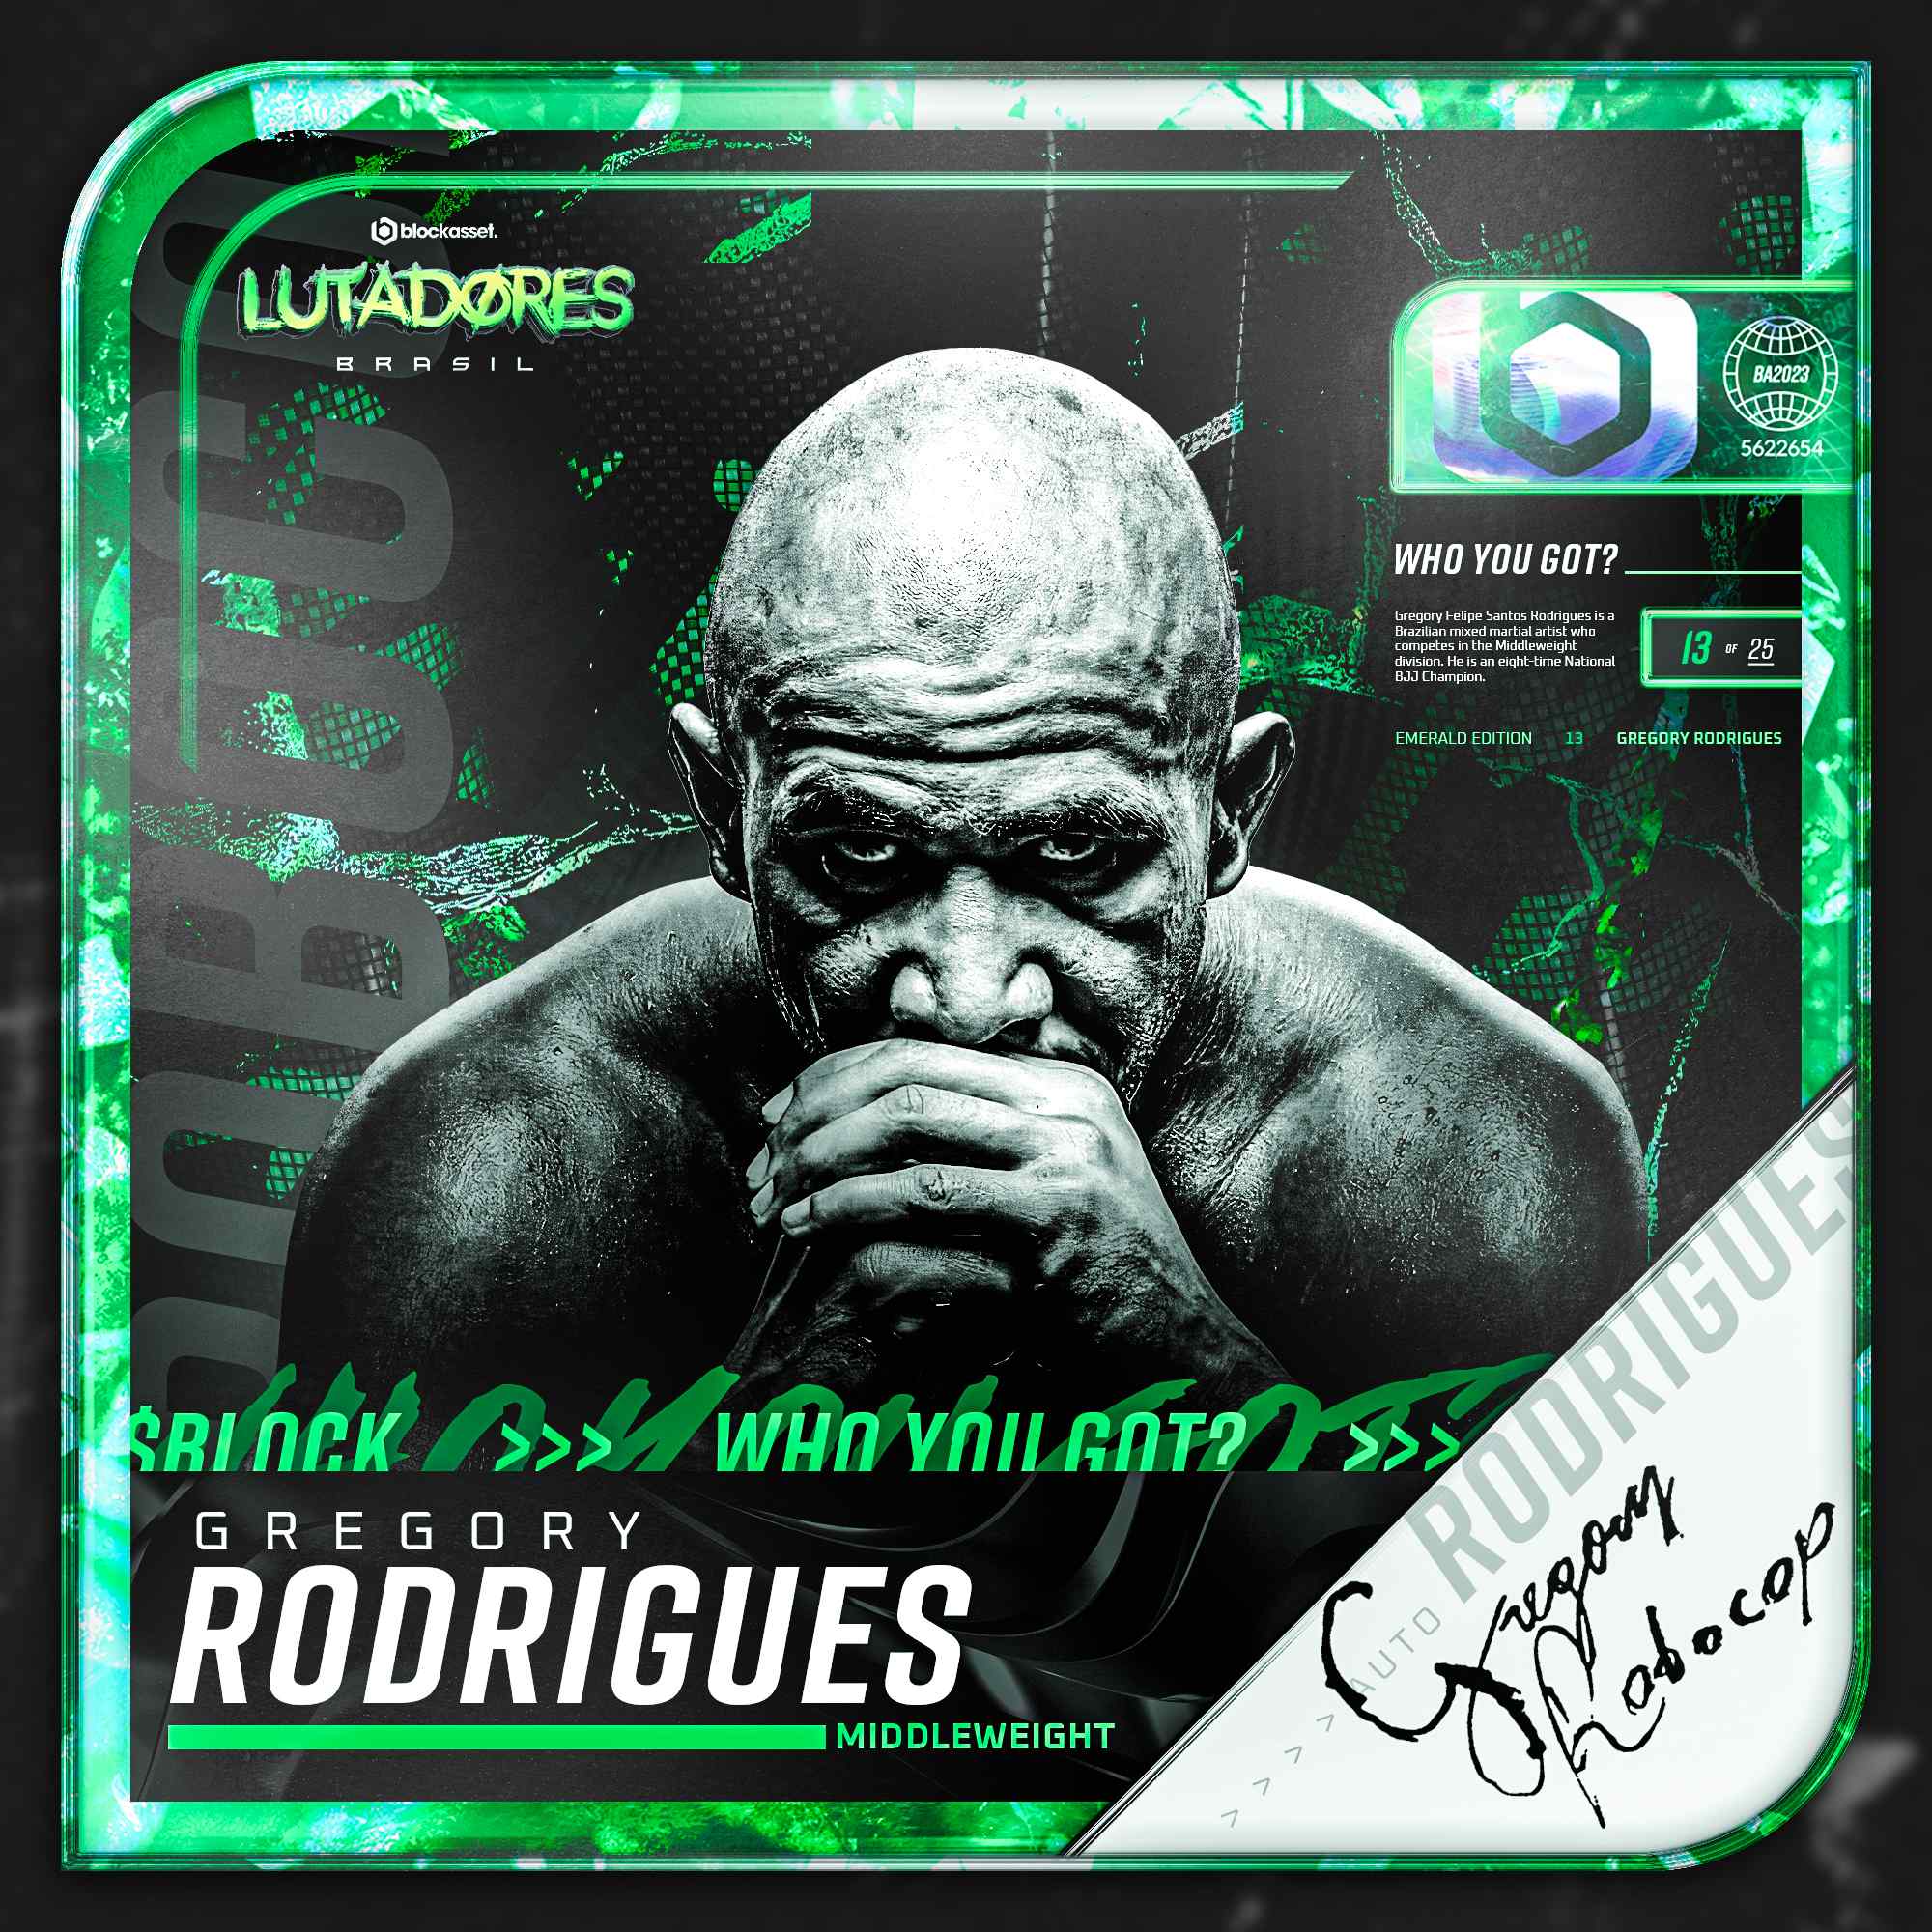 Gregory Rodrigues #013